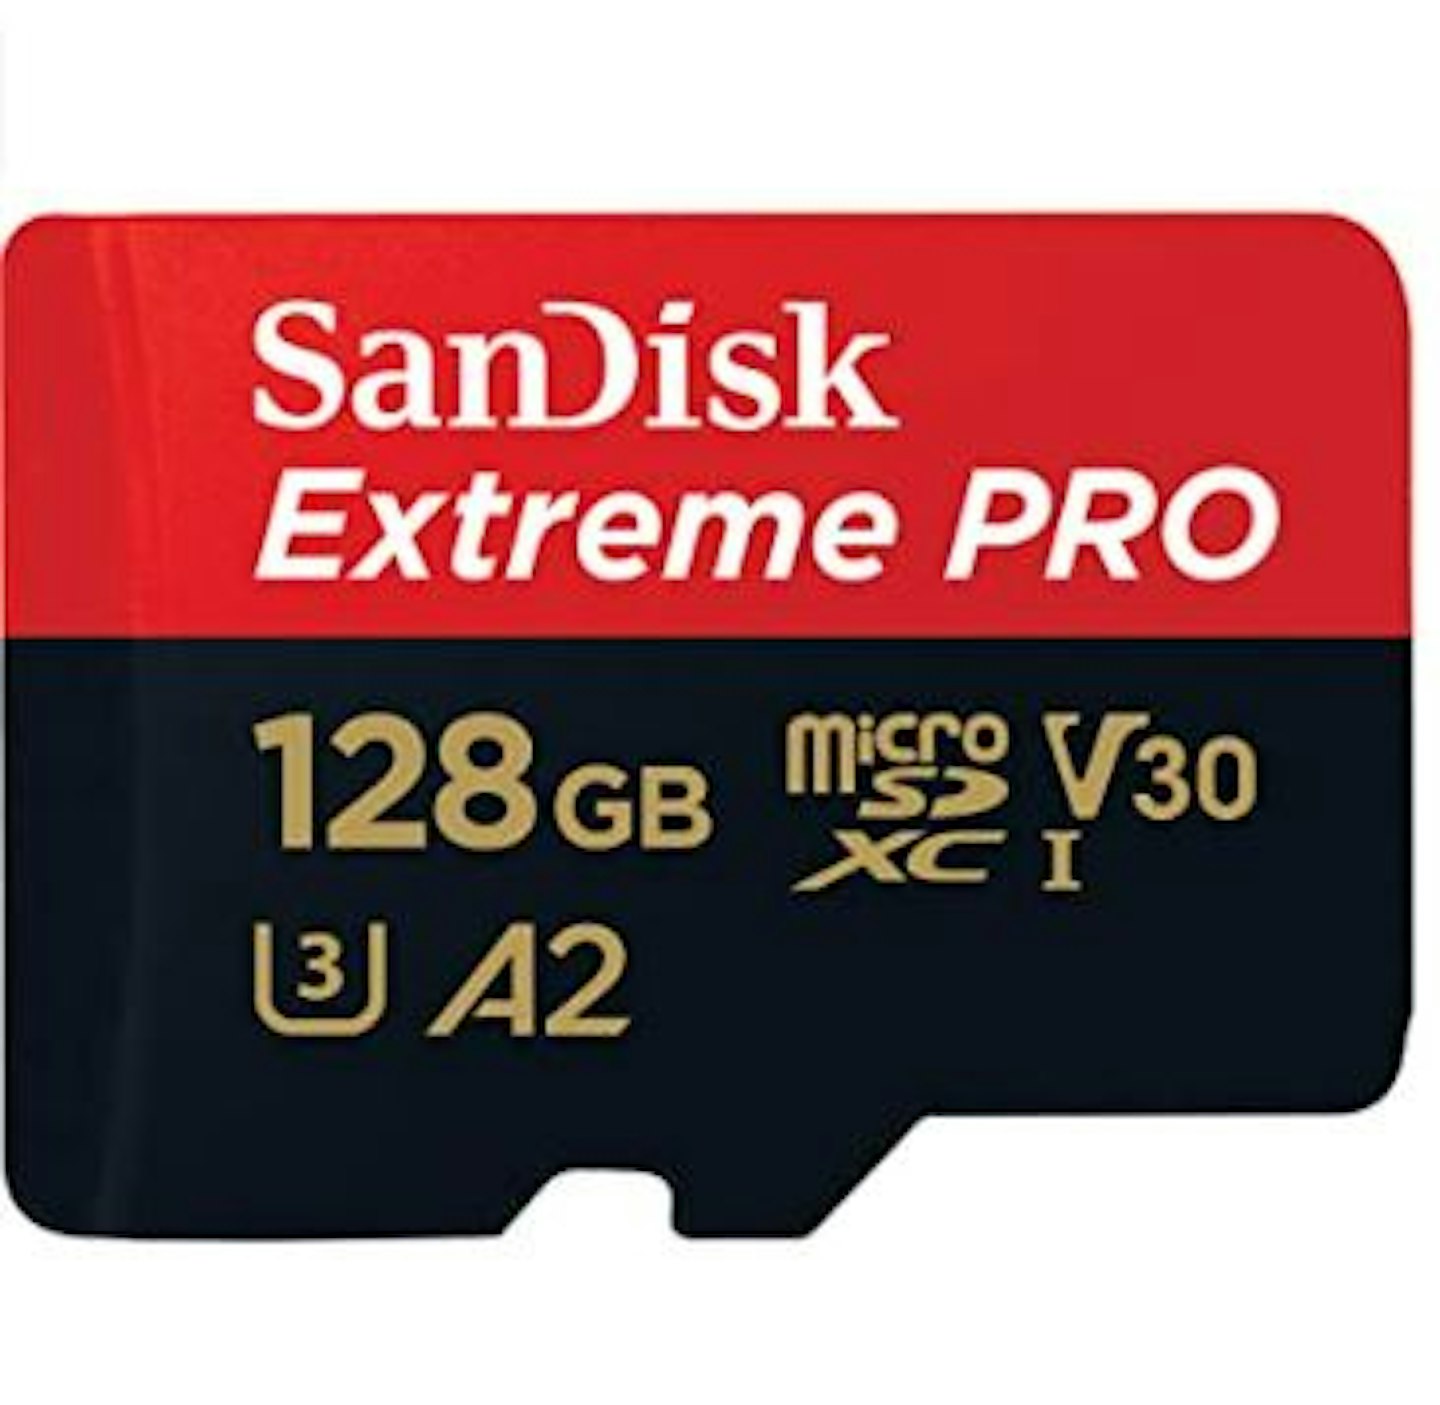 SanDisk Extreme Pro 128GB microSDXC Memory Card + SD Adapter